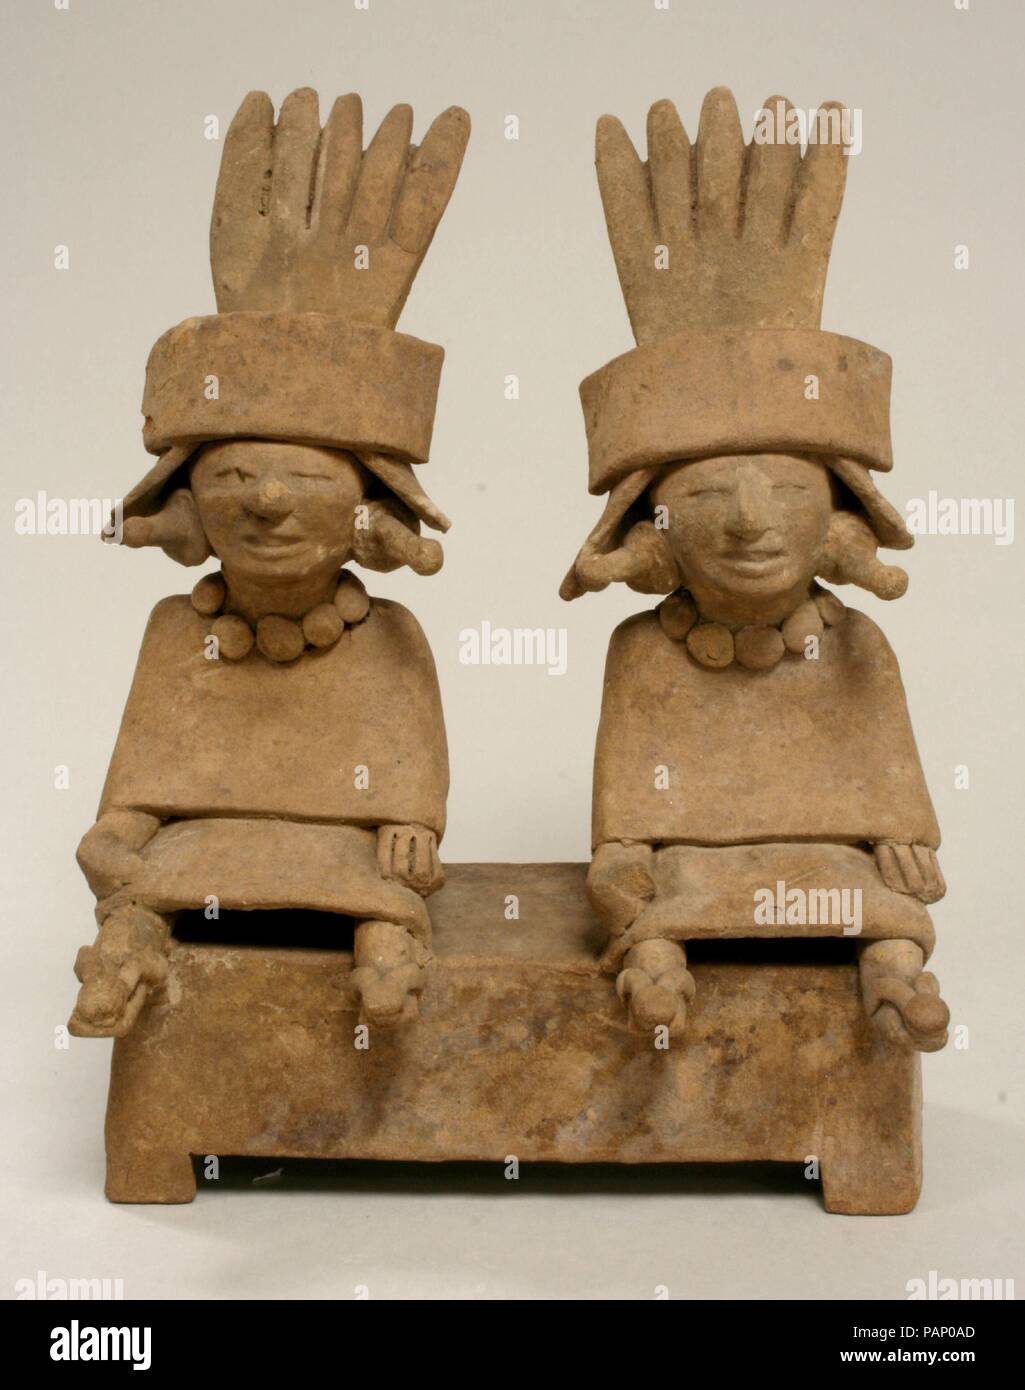 Two Ceramic Figures Seated on a Bench. Culture: Remojadas. Dimensions: H. 8 13/16 x W. 6 7/8 x D. 4 in. (22.5 x 17.5 x 10.2 cm). Date: 6th-9th century. Museum: Metropolitan Museum of Art, New York, USA. Stock Photo